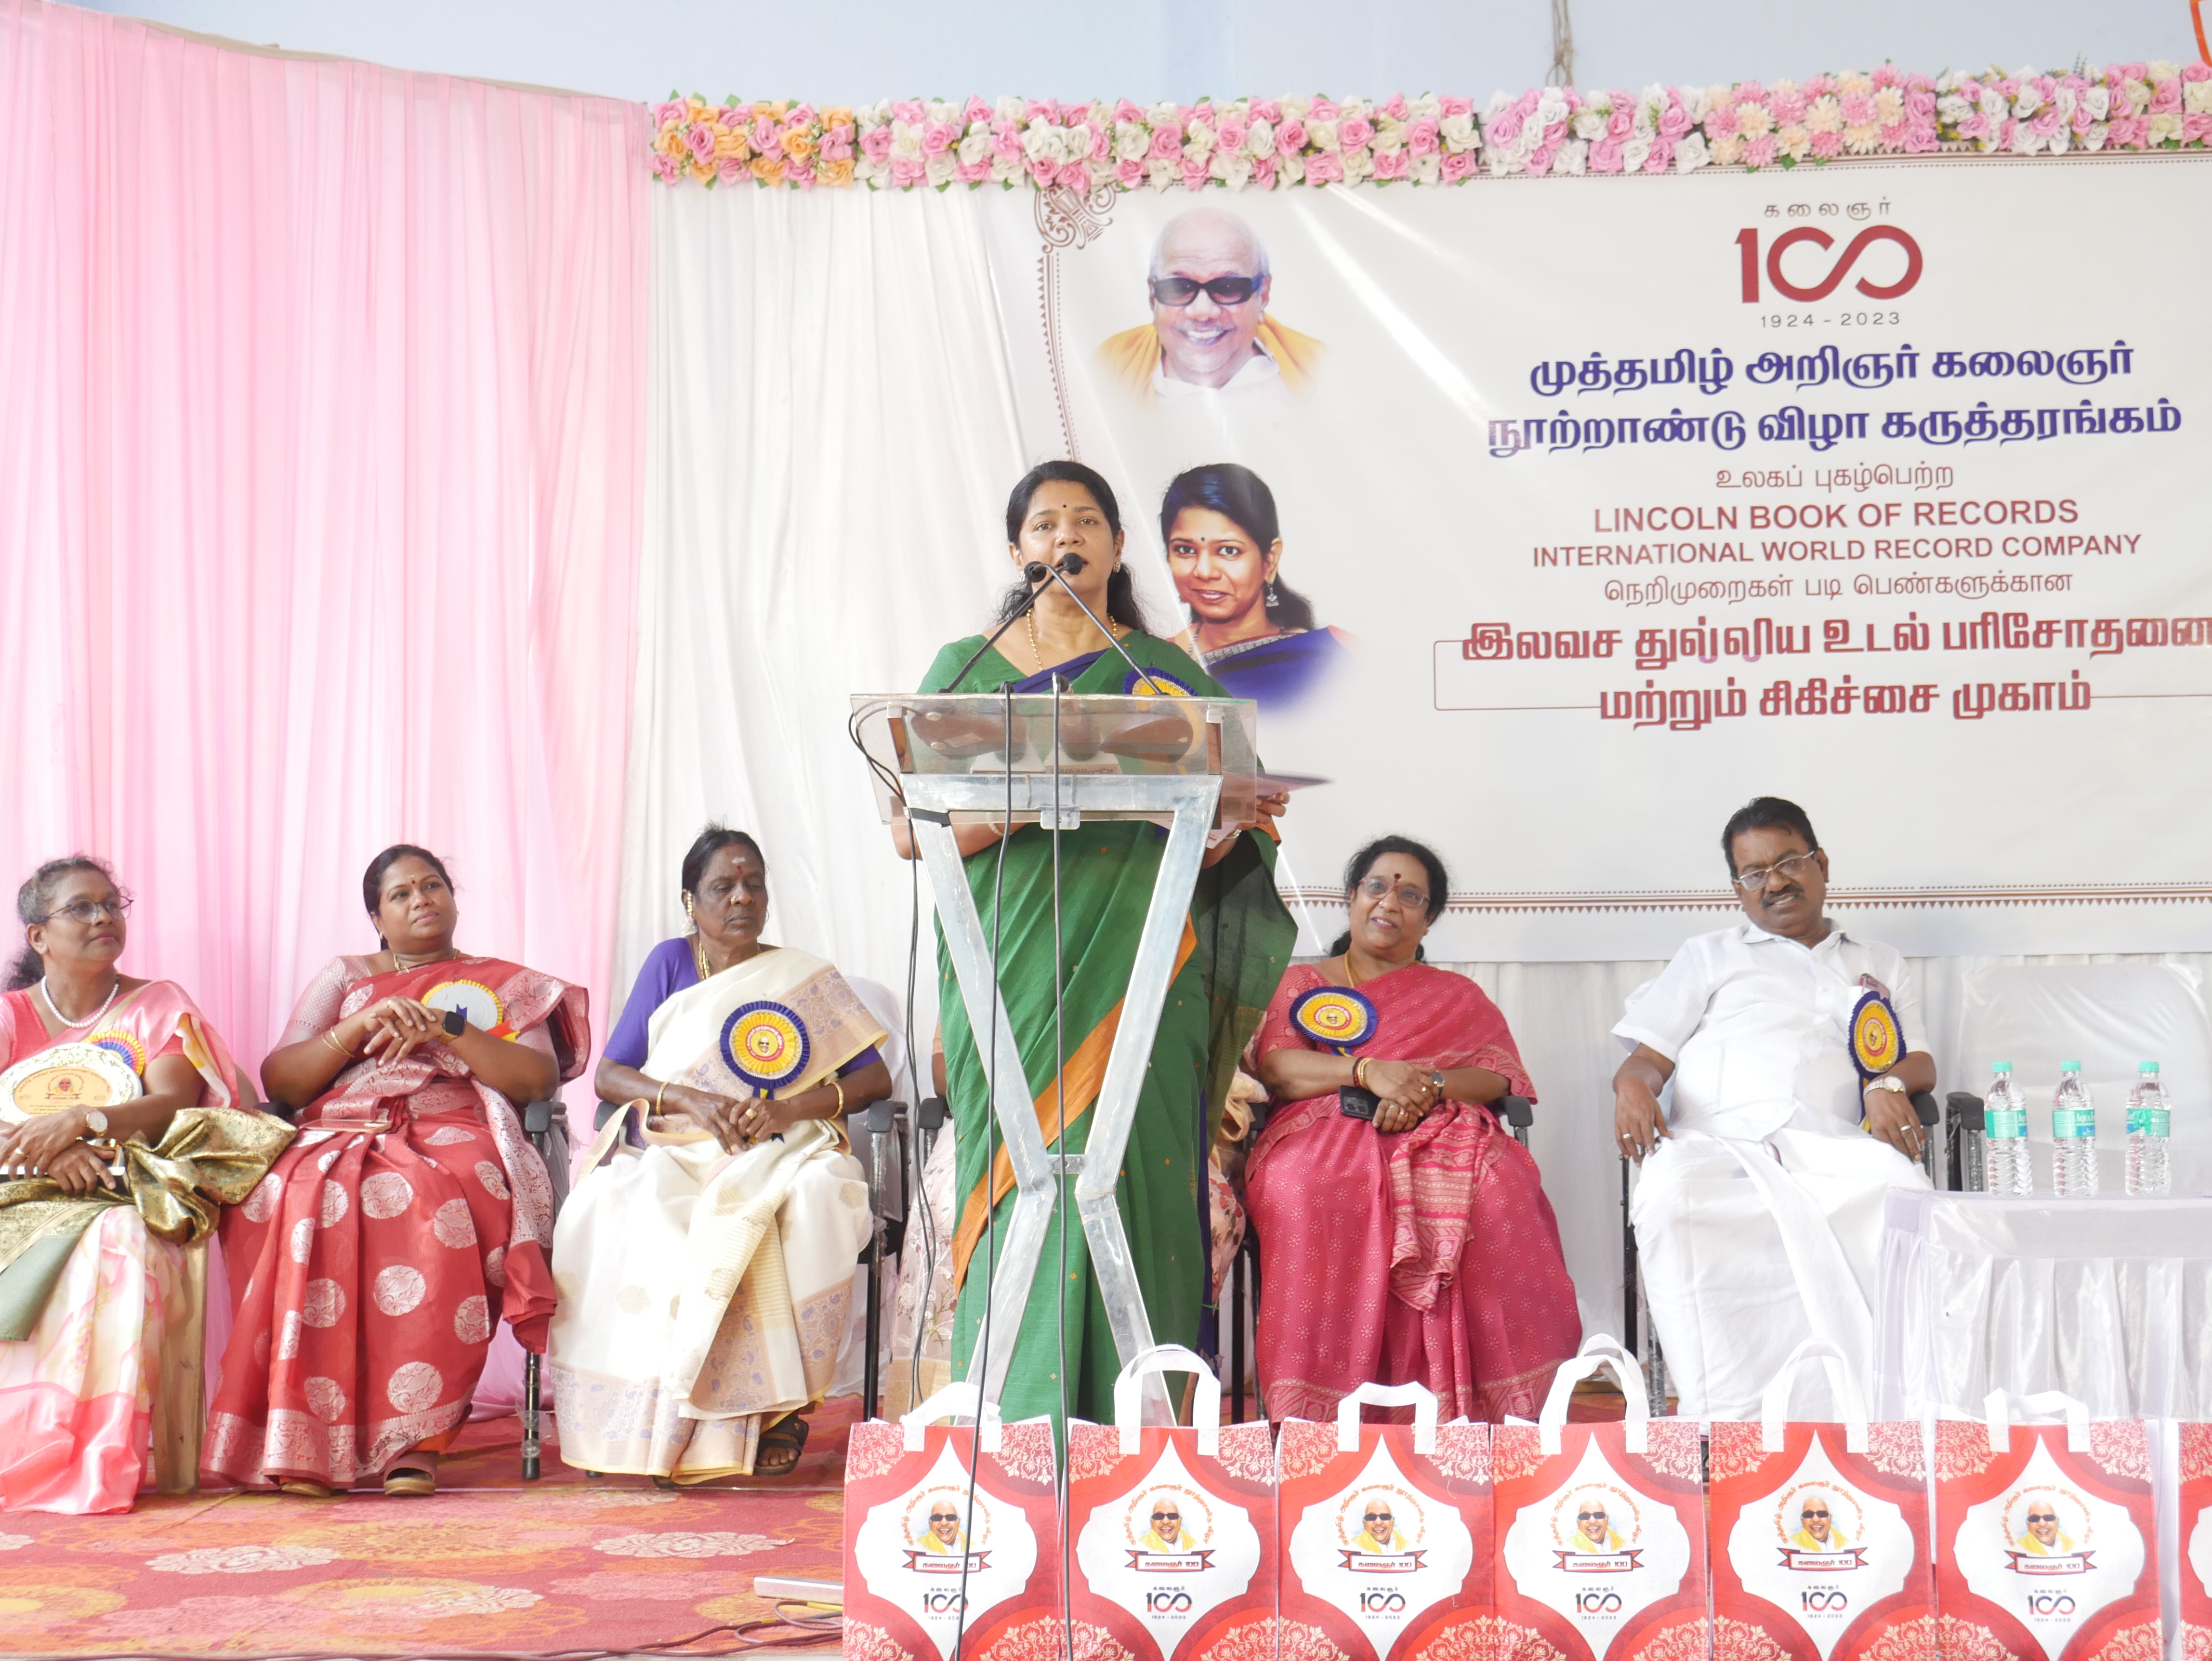 World Record by performing 100 medical  tests on 100 women in 100 minutes